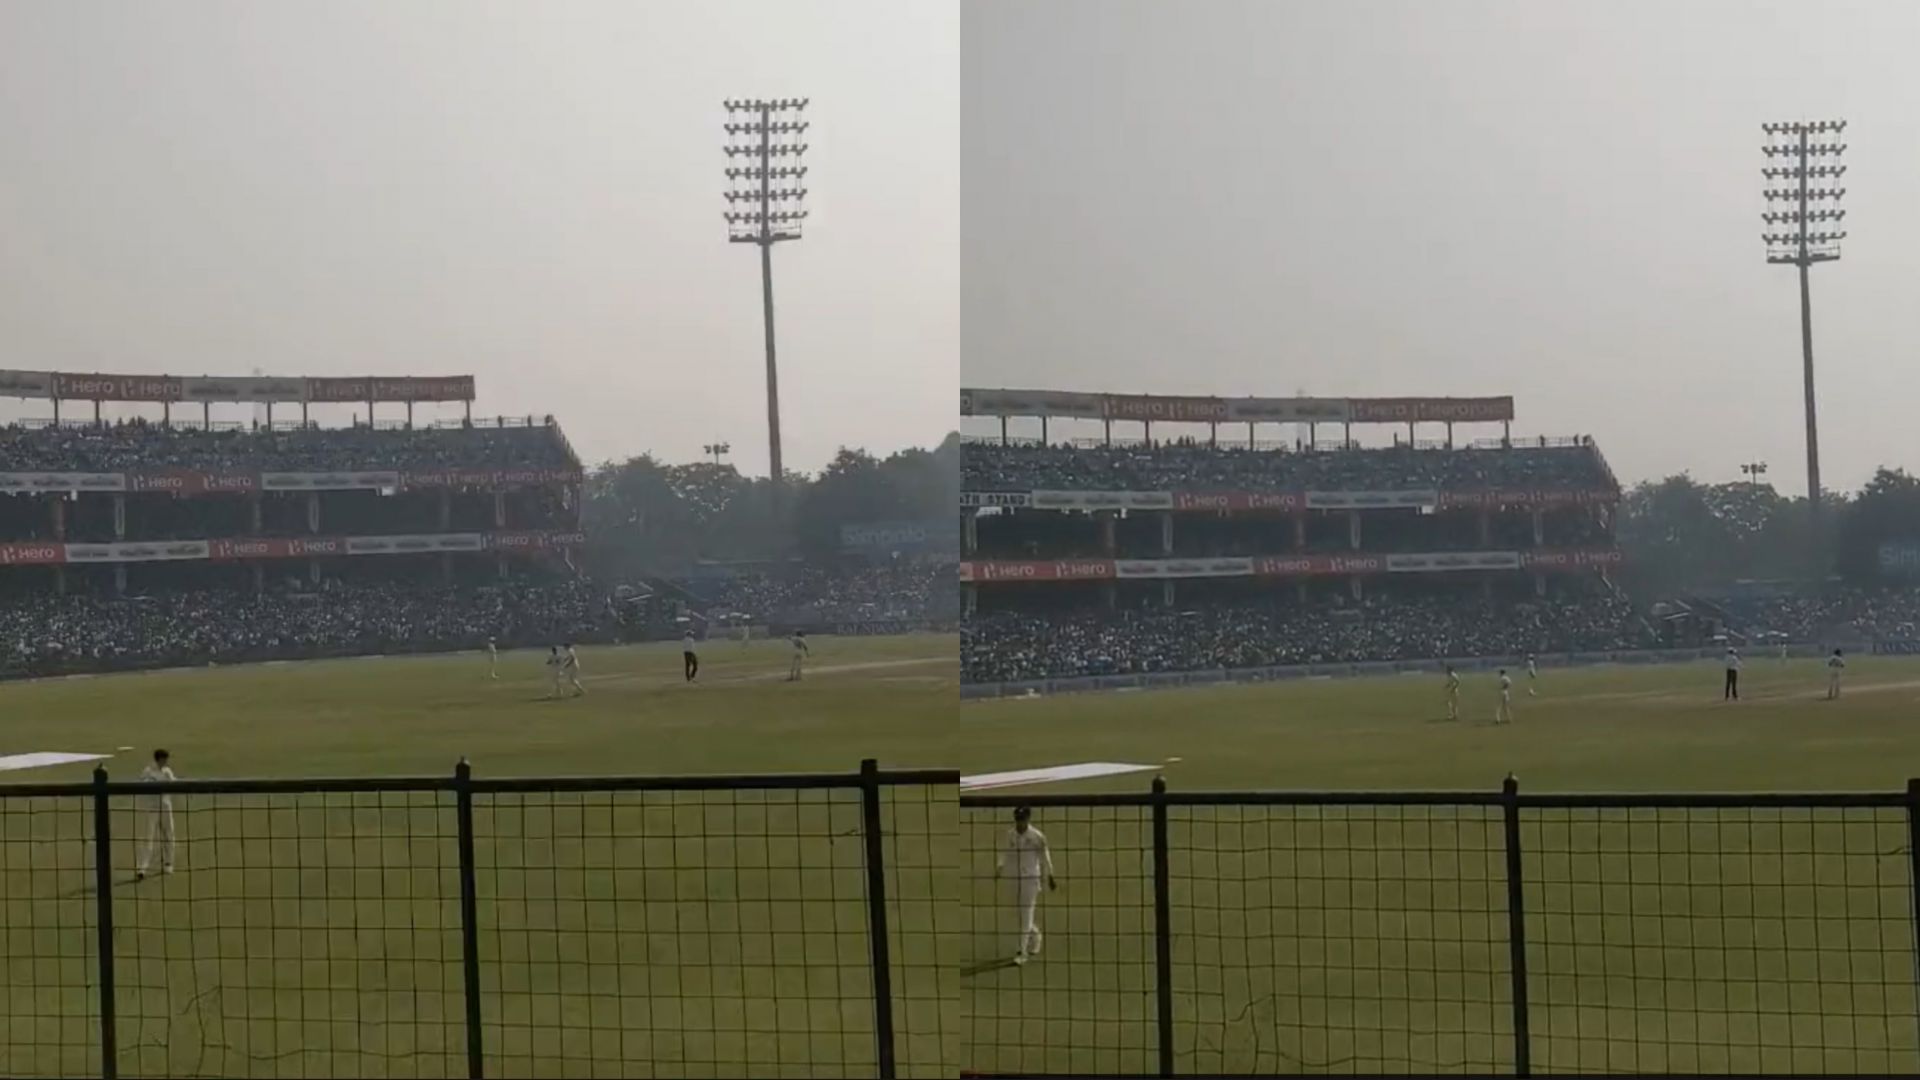 Fans in Delhi tried to annoy the Australians (Image: Twitter)